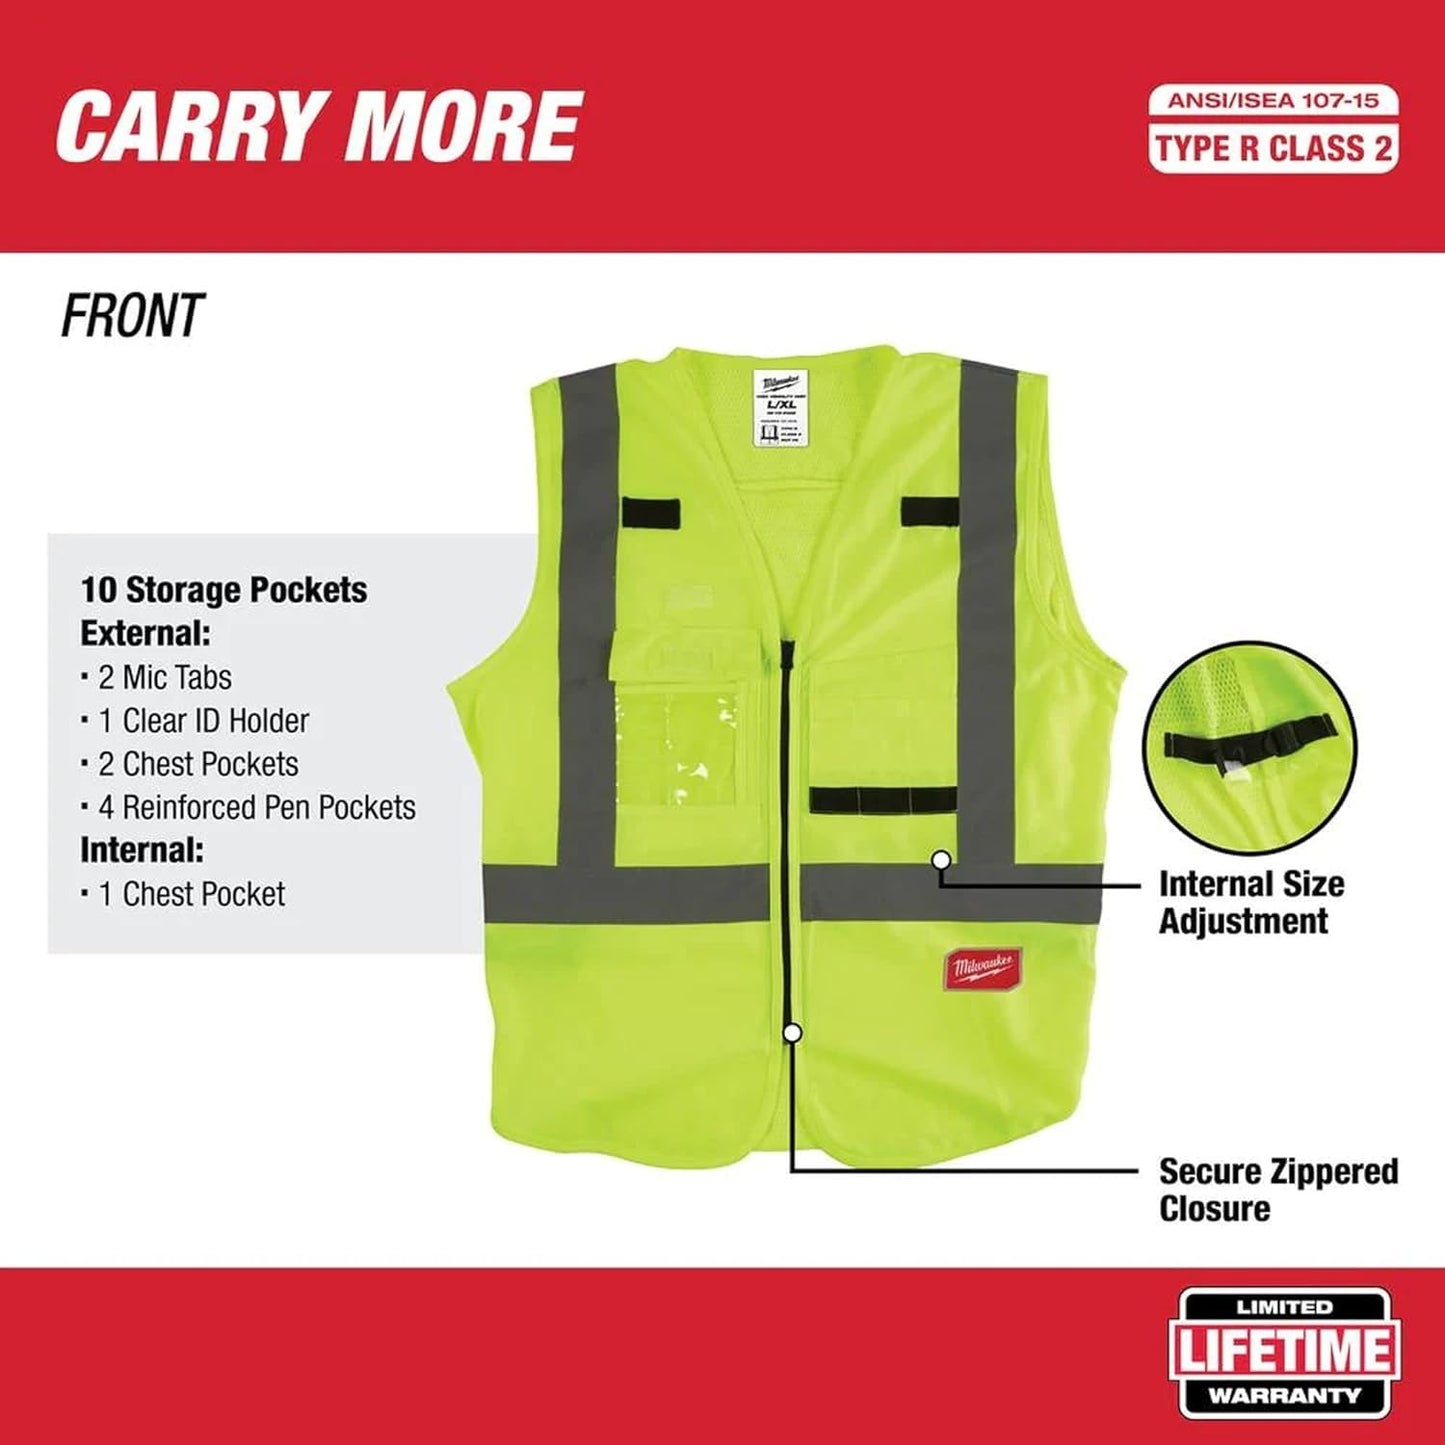 Milwaukee Polyester Safety Vest High Visibility Reflective Yellow L/XL